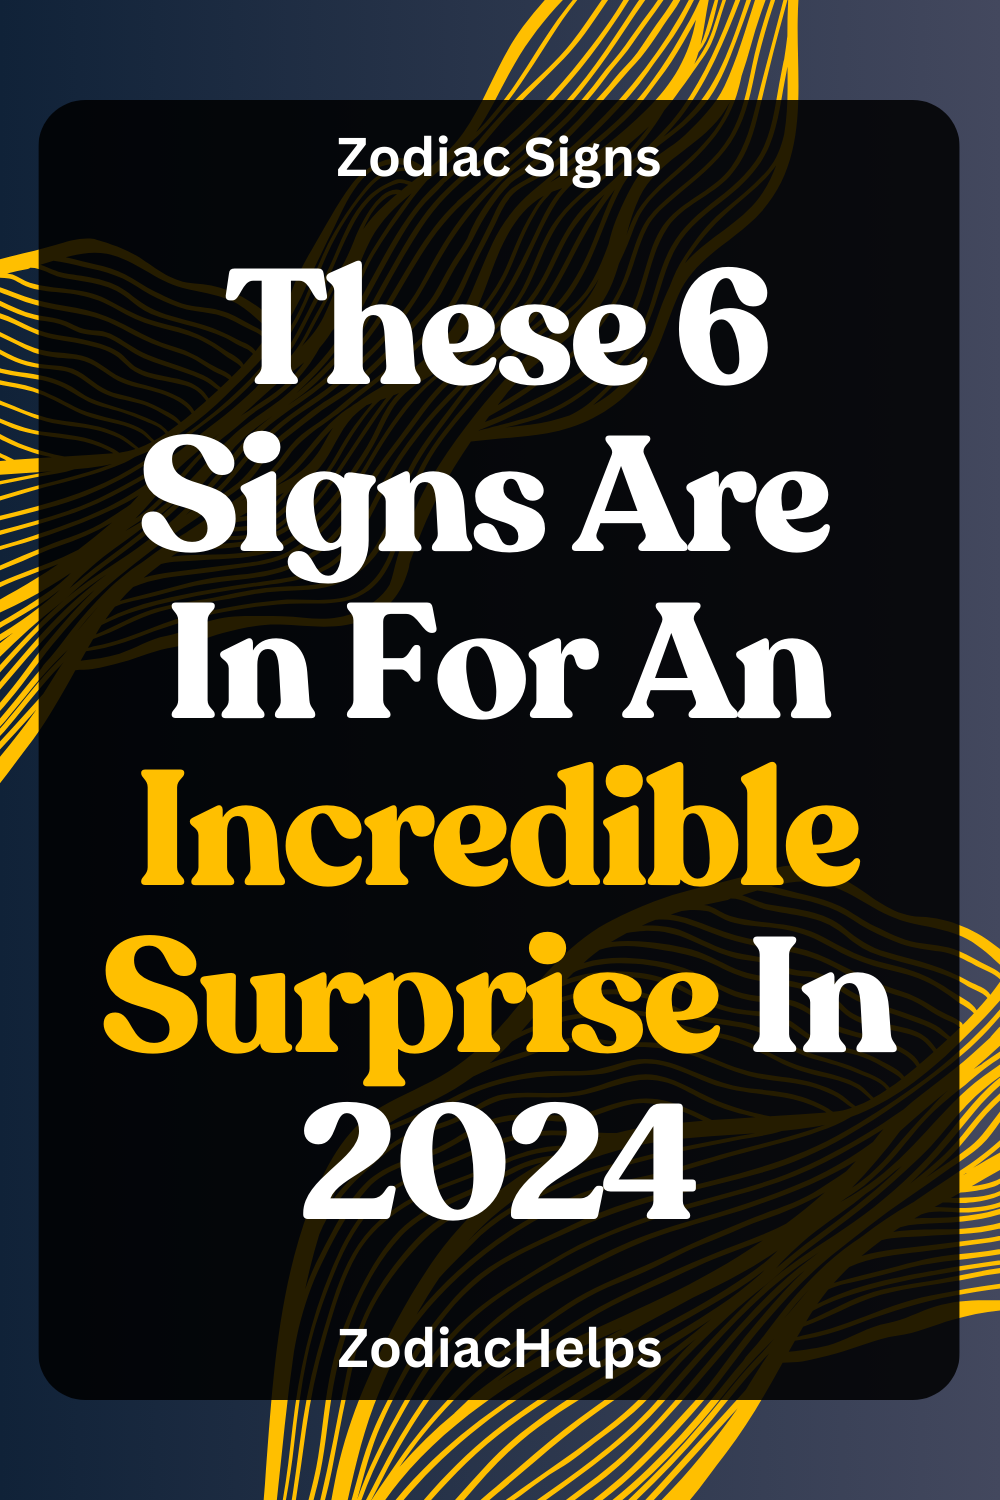 These 6 Signs Are In For An Incredible Surprise In 2024